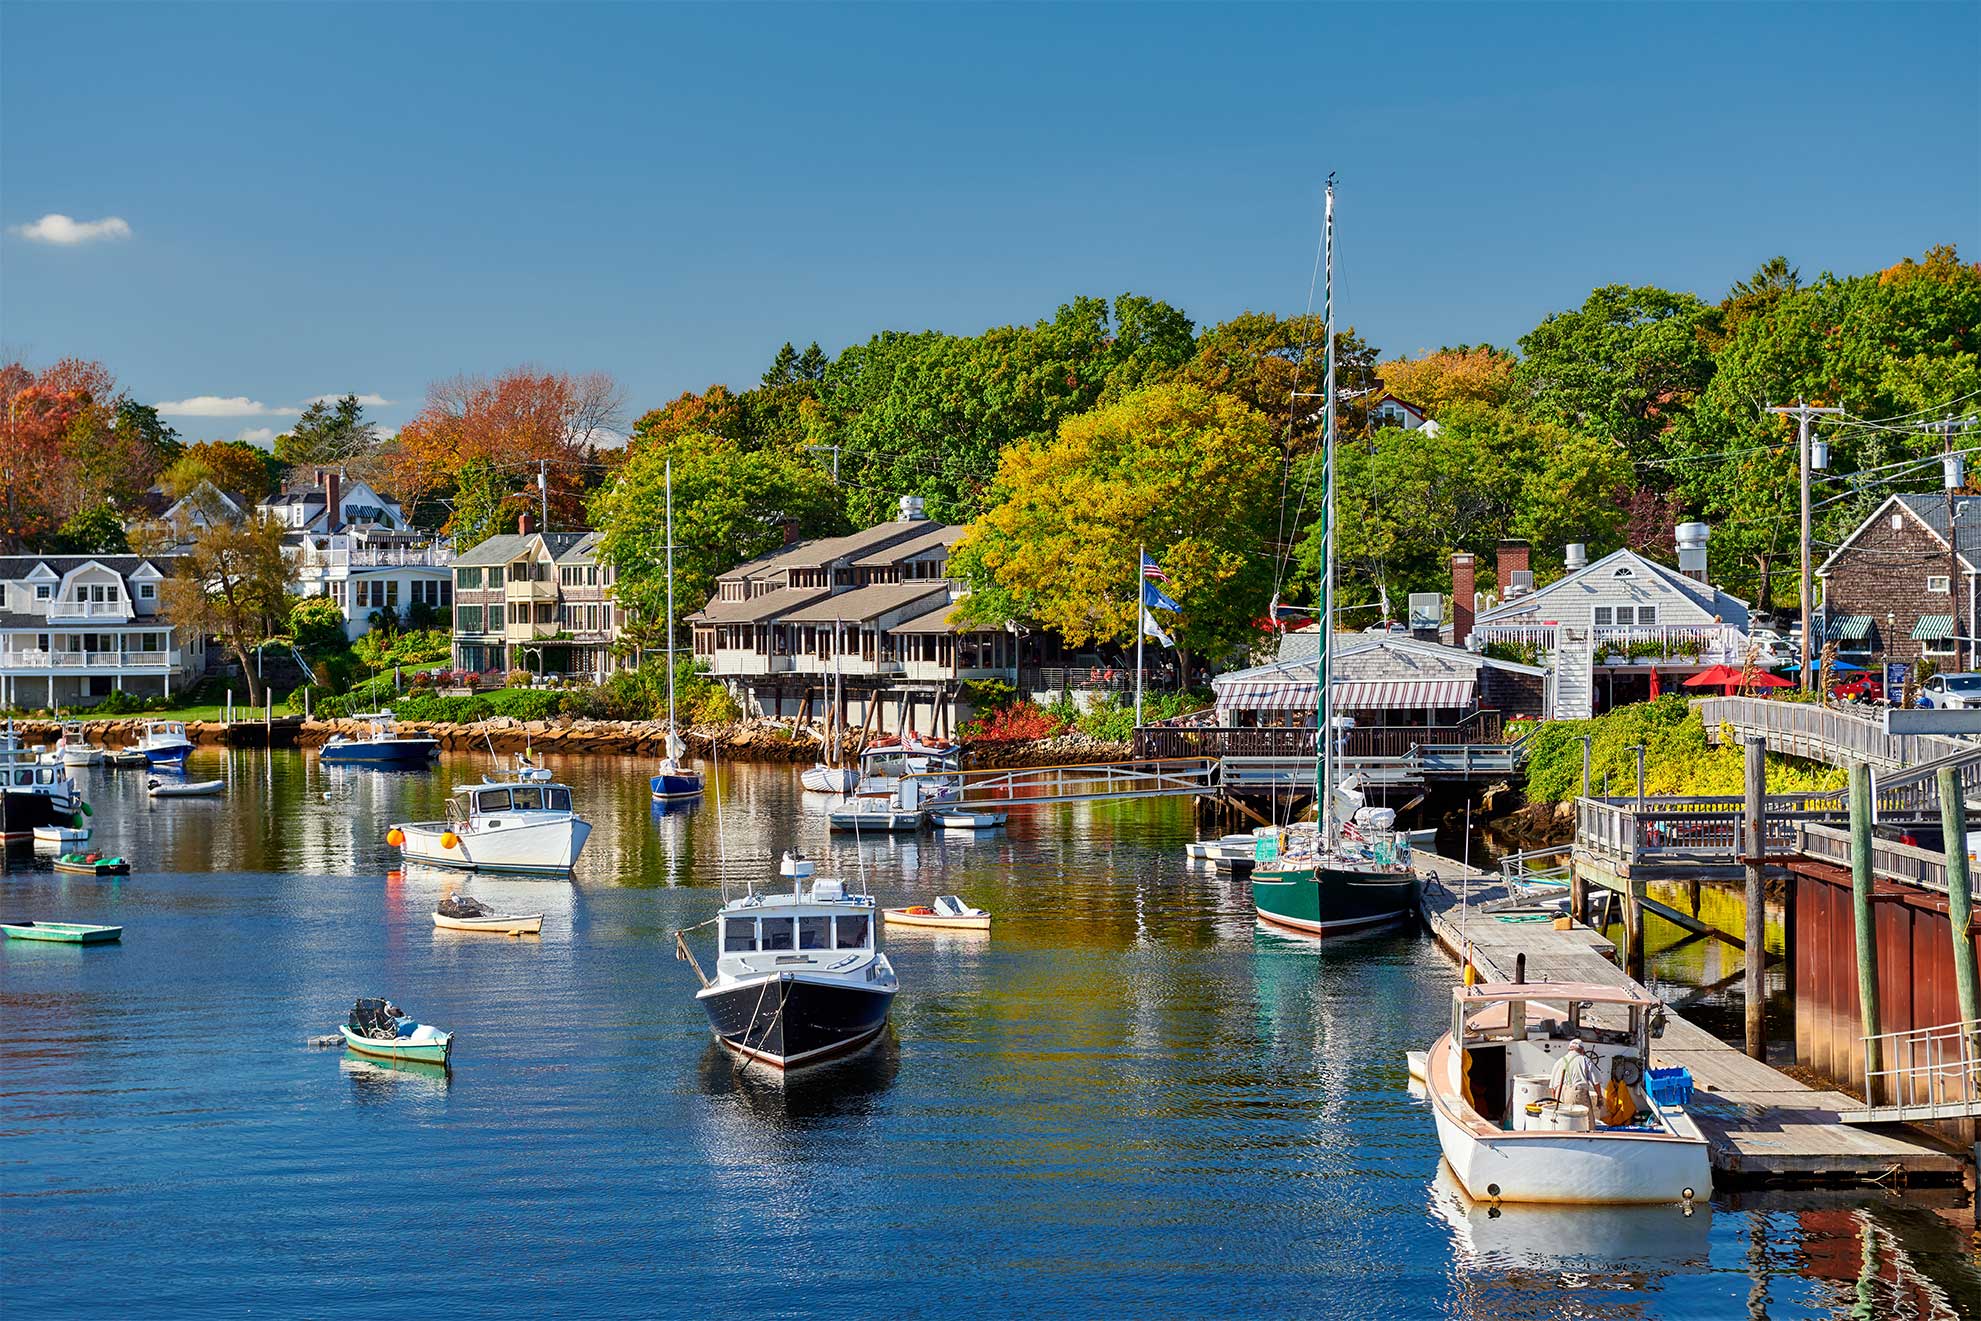 Perkins Cove Boats in Early Fall